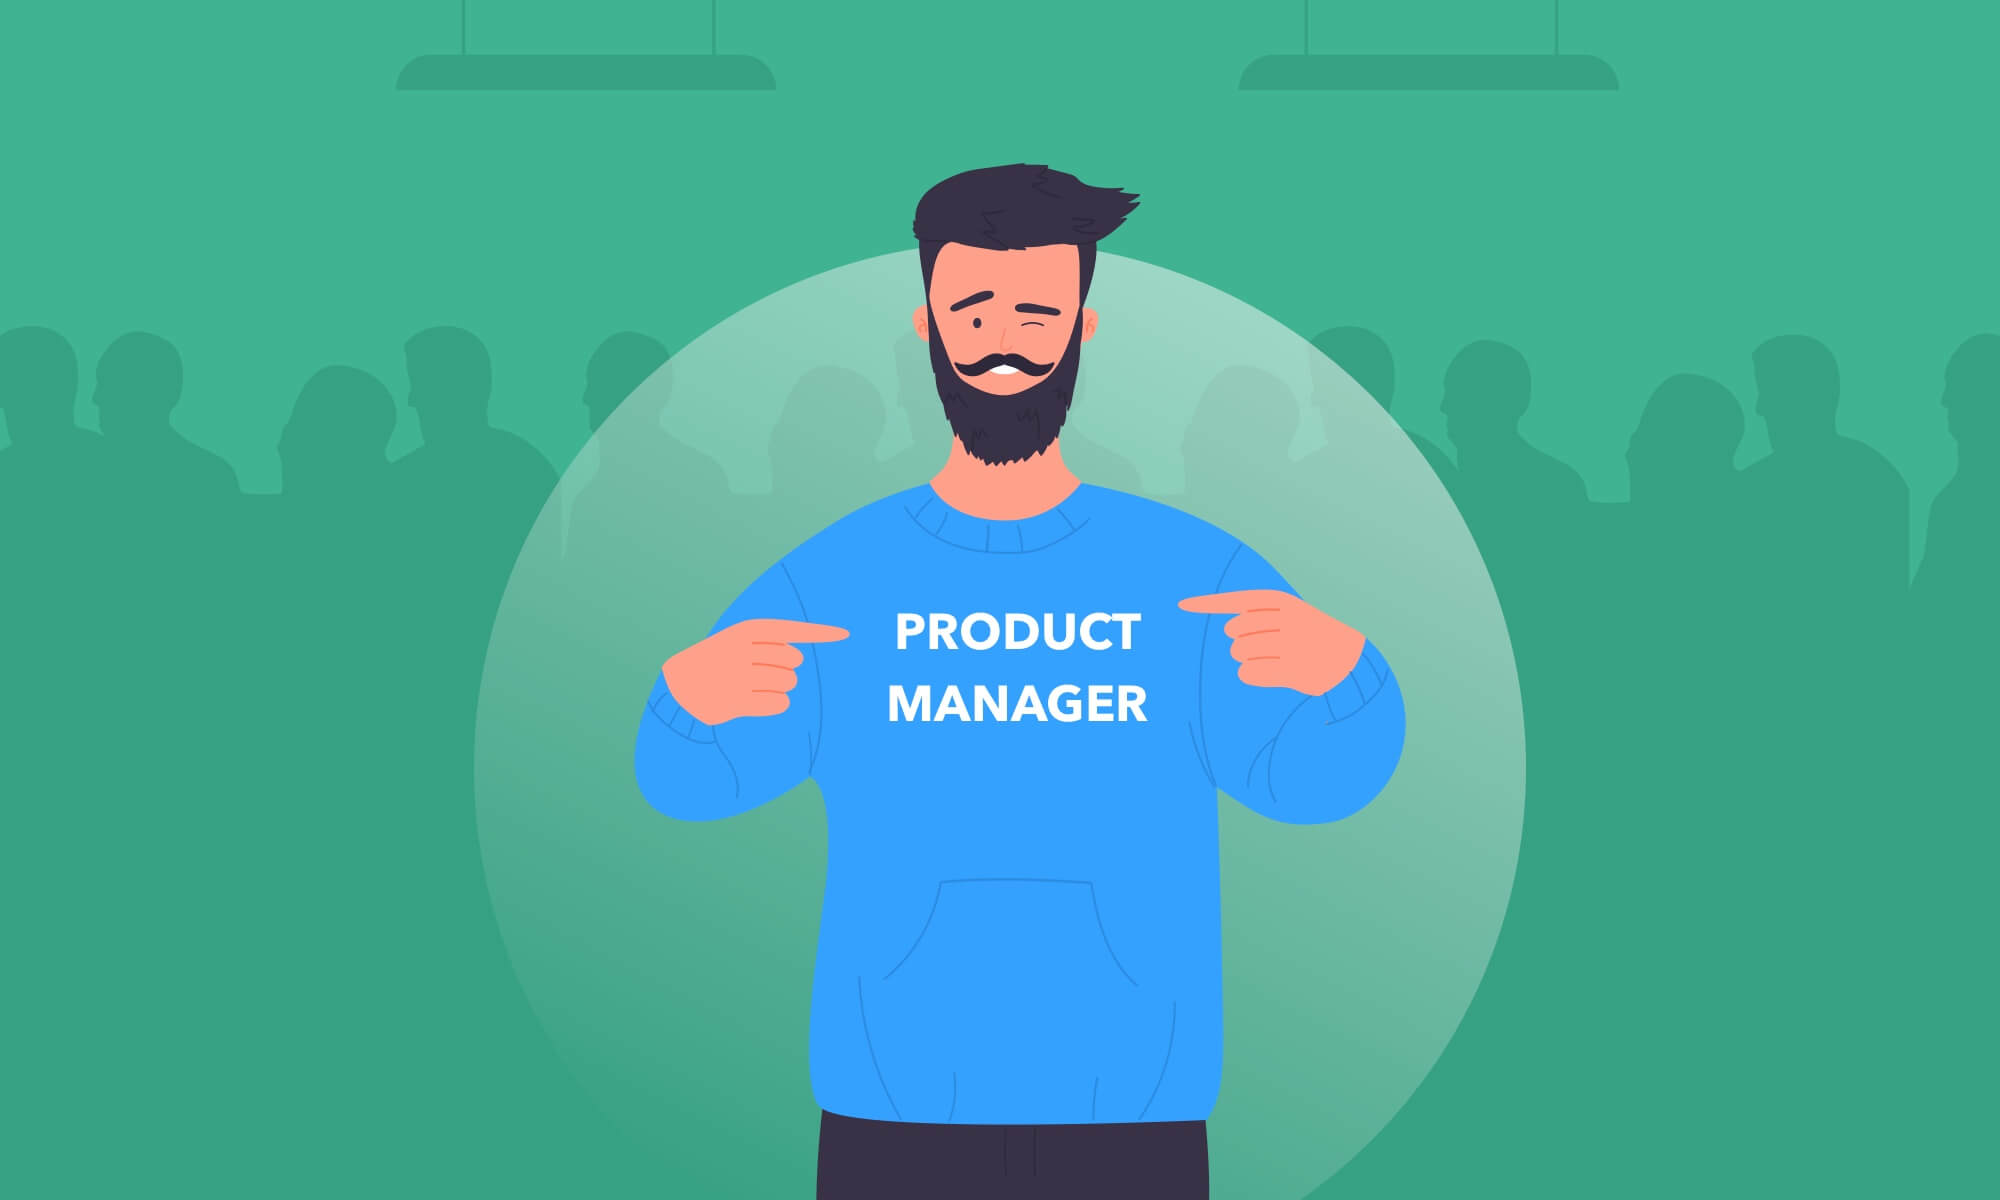 What is a product manager